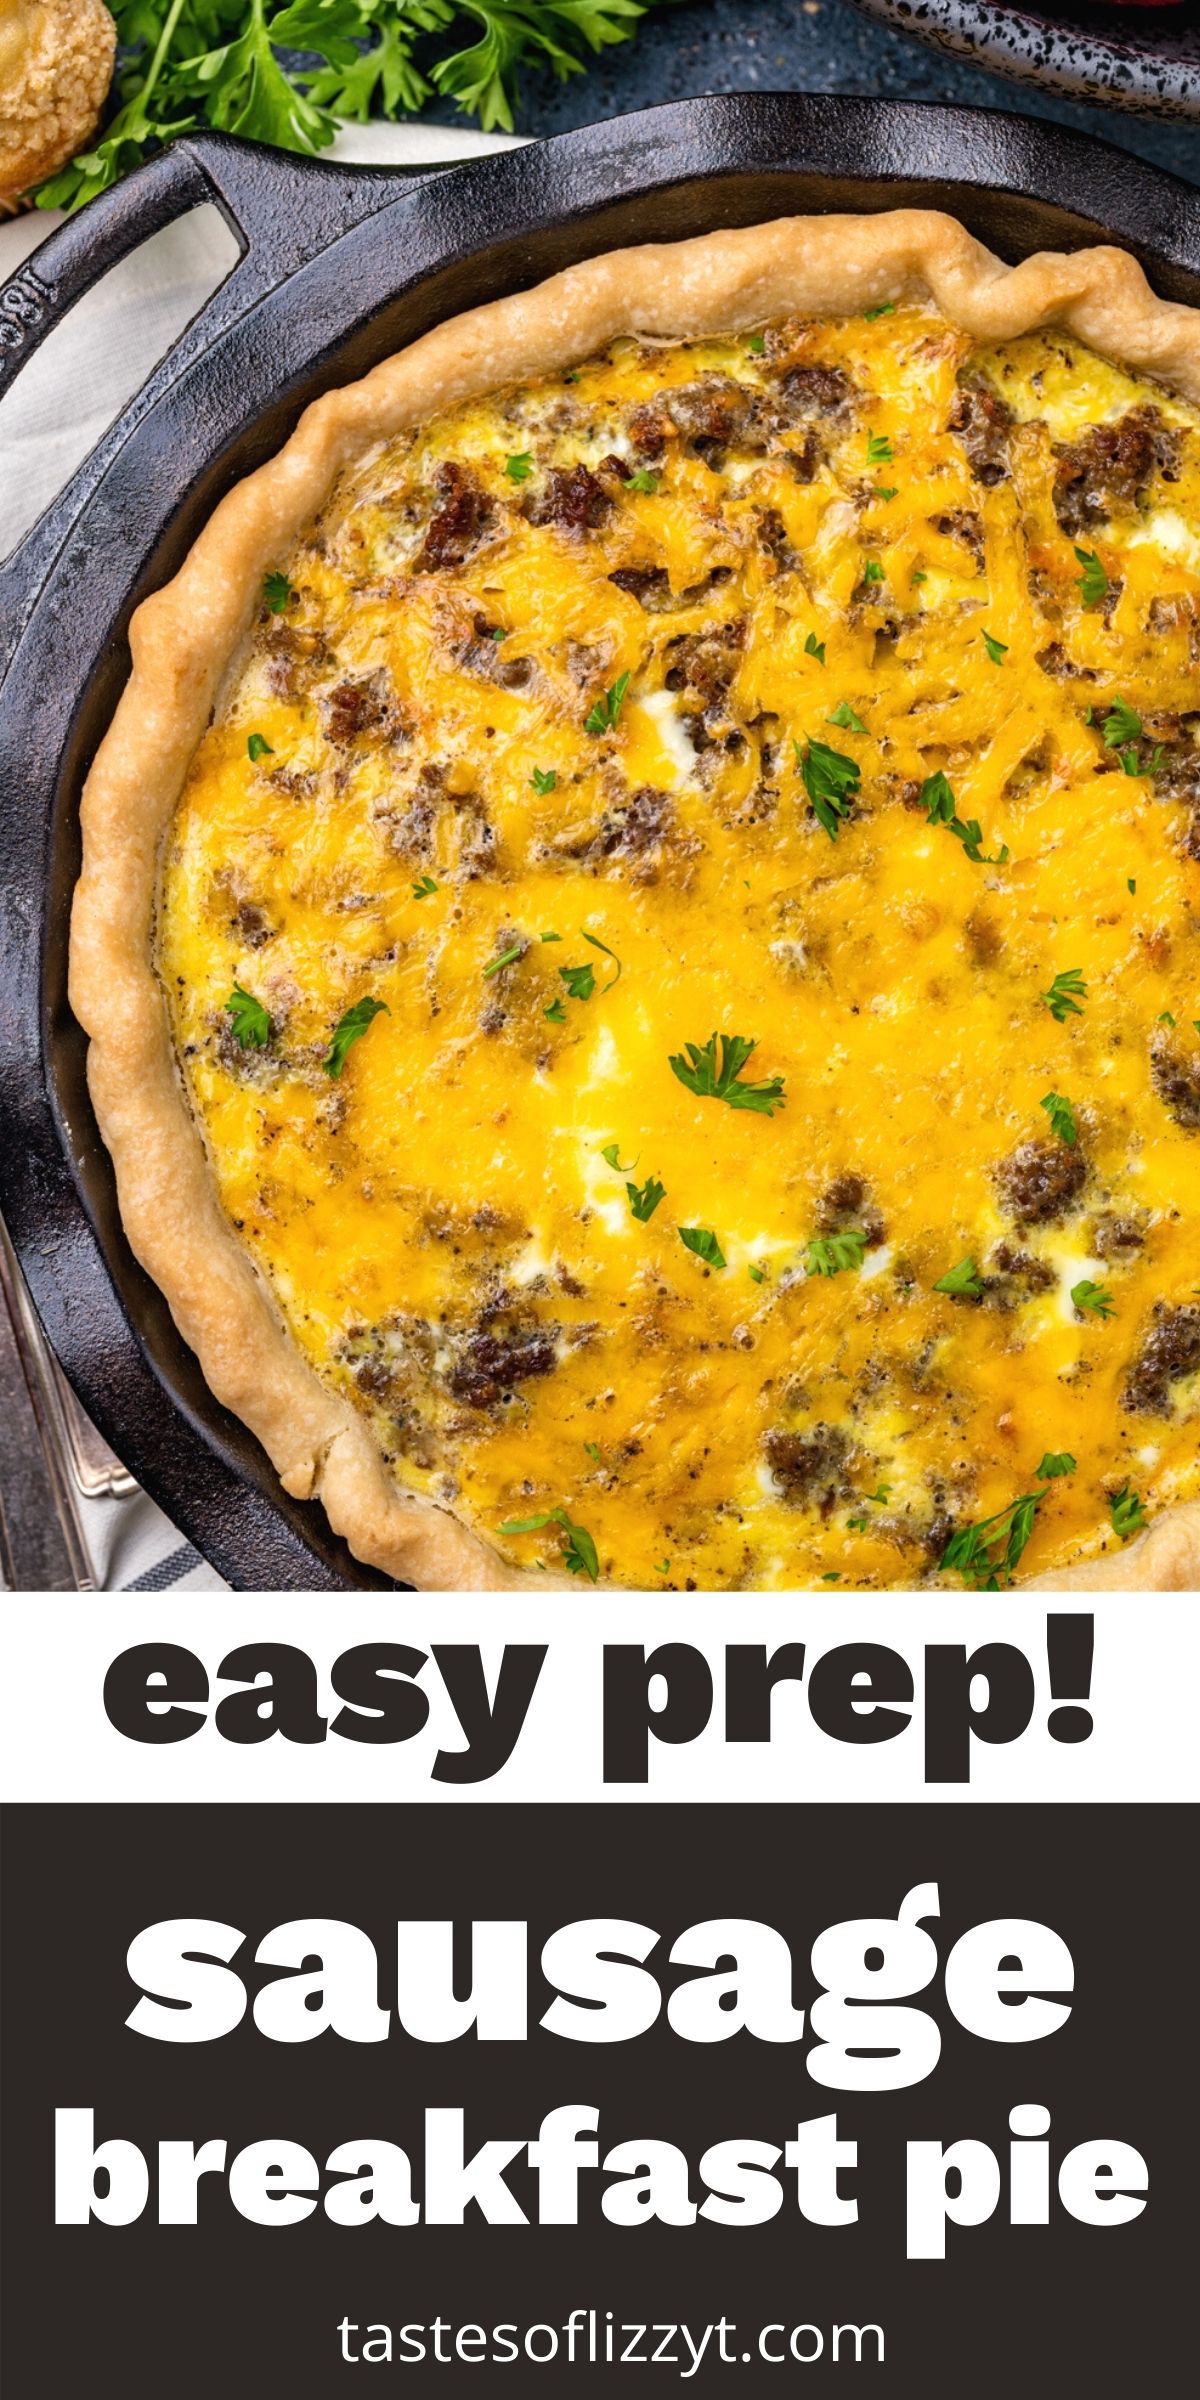 This recipe combines three essential breakfast foods — sausage, eggs and cheese — and bakes them inside a flaky pie crust. The result is a delicious dish that’s ideal for weekend brunch or a holiday breakfast. via @tastesoflizzyt